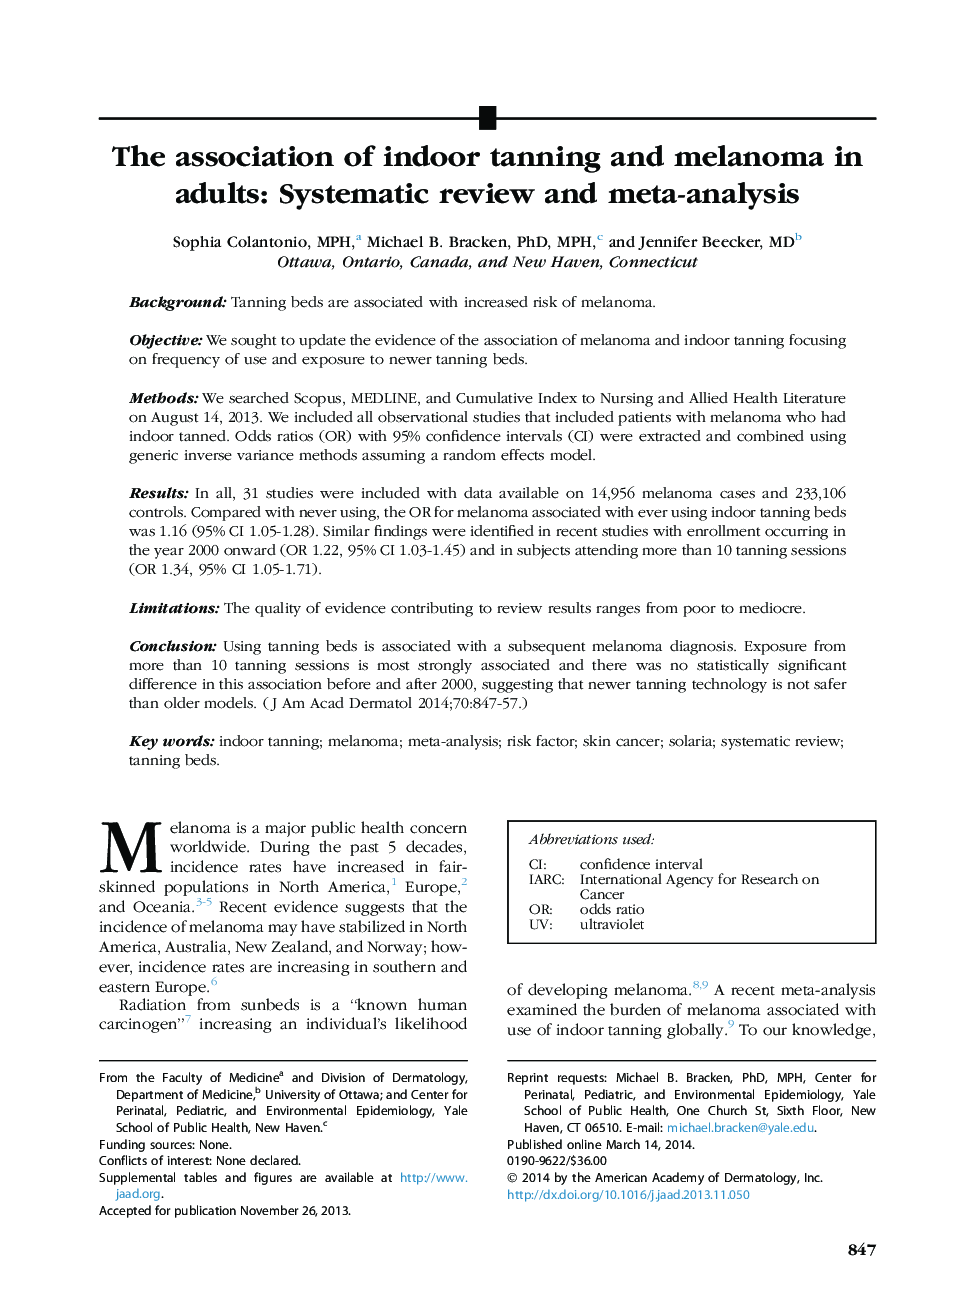 The association of indoor tanning and melanoma in adults: Systematic review and meta-analysis